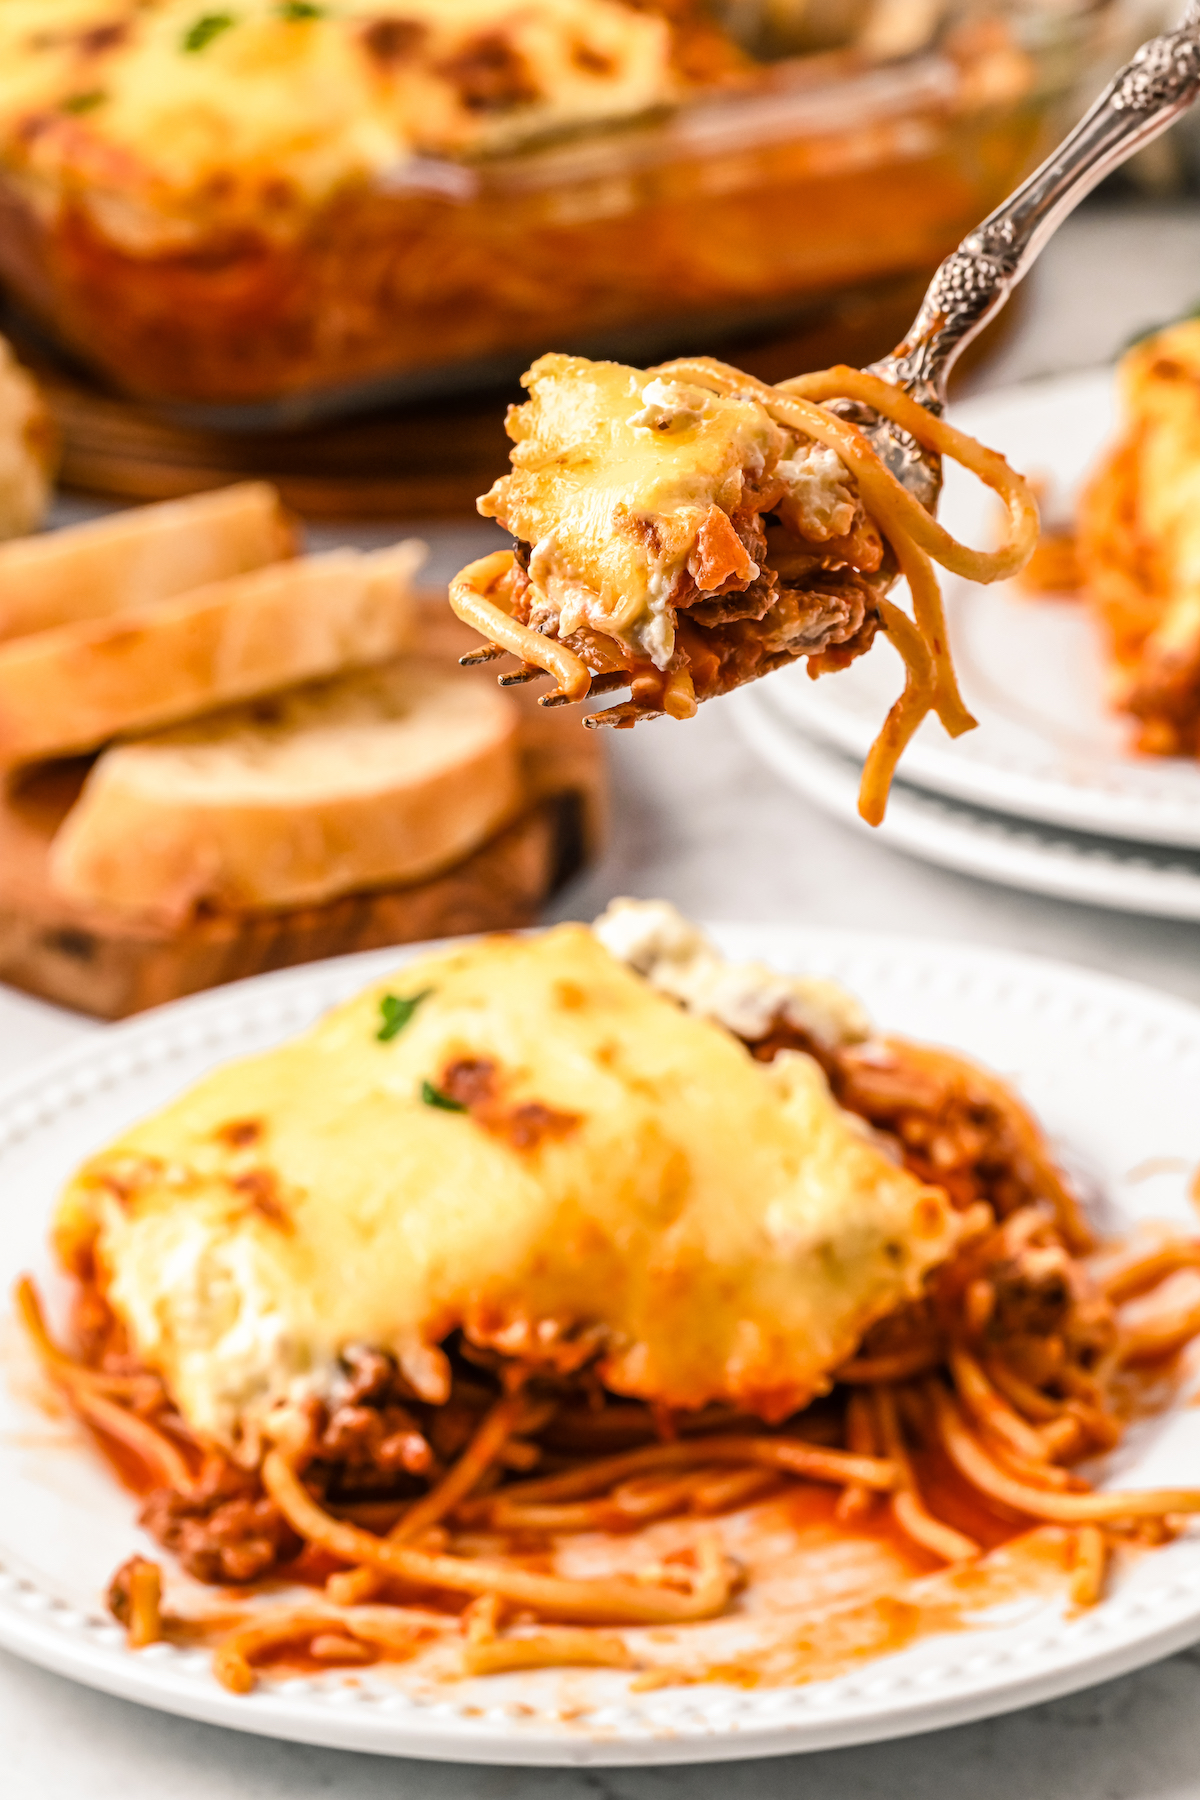 A dinner plate of baked pasta with a fork lifting a bite toward the camera.